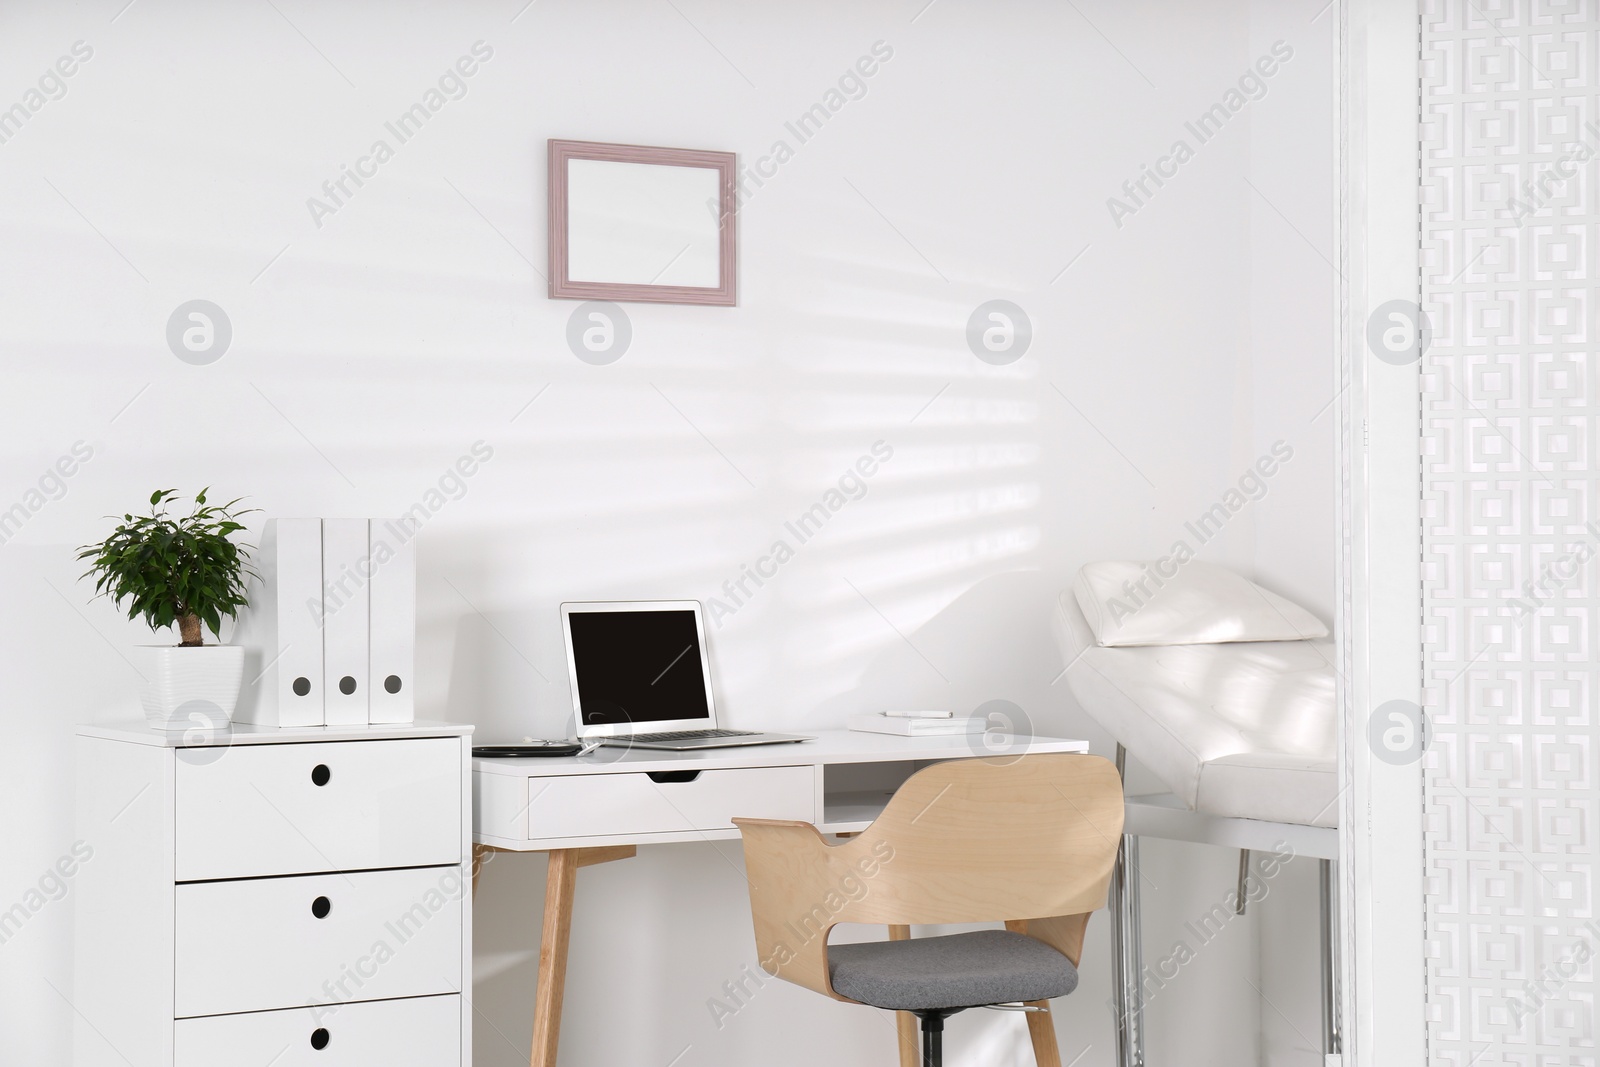 Photo of Doctor's office interior with examination couch and desk